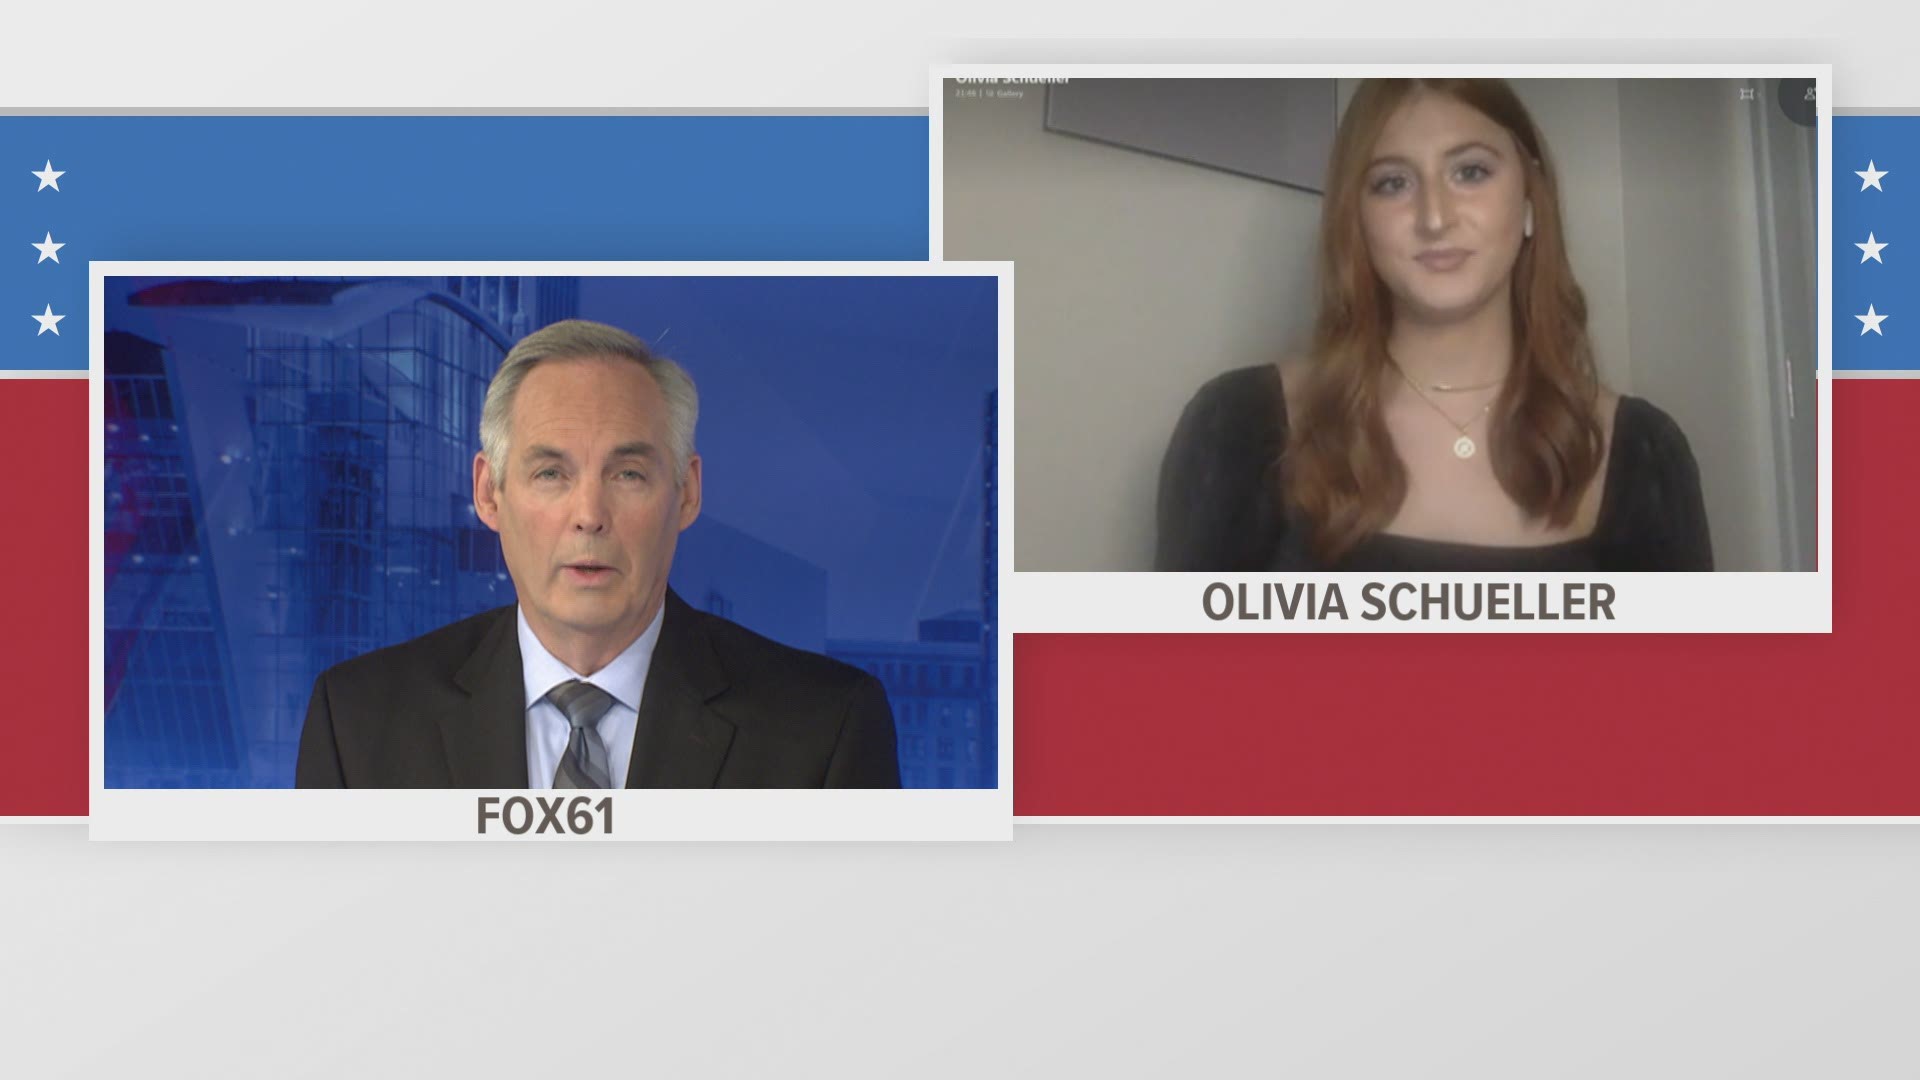 Our election 2020 coverage continues. Olivia Schueller ,a student at Quinnipiac University, brings us this special report.